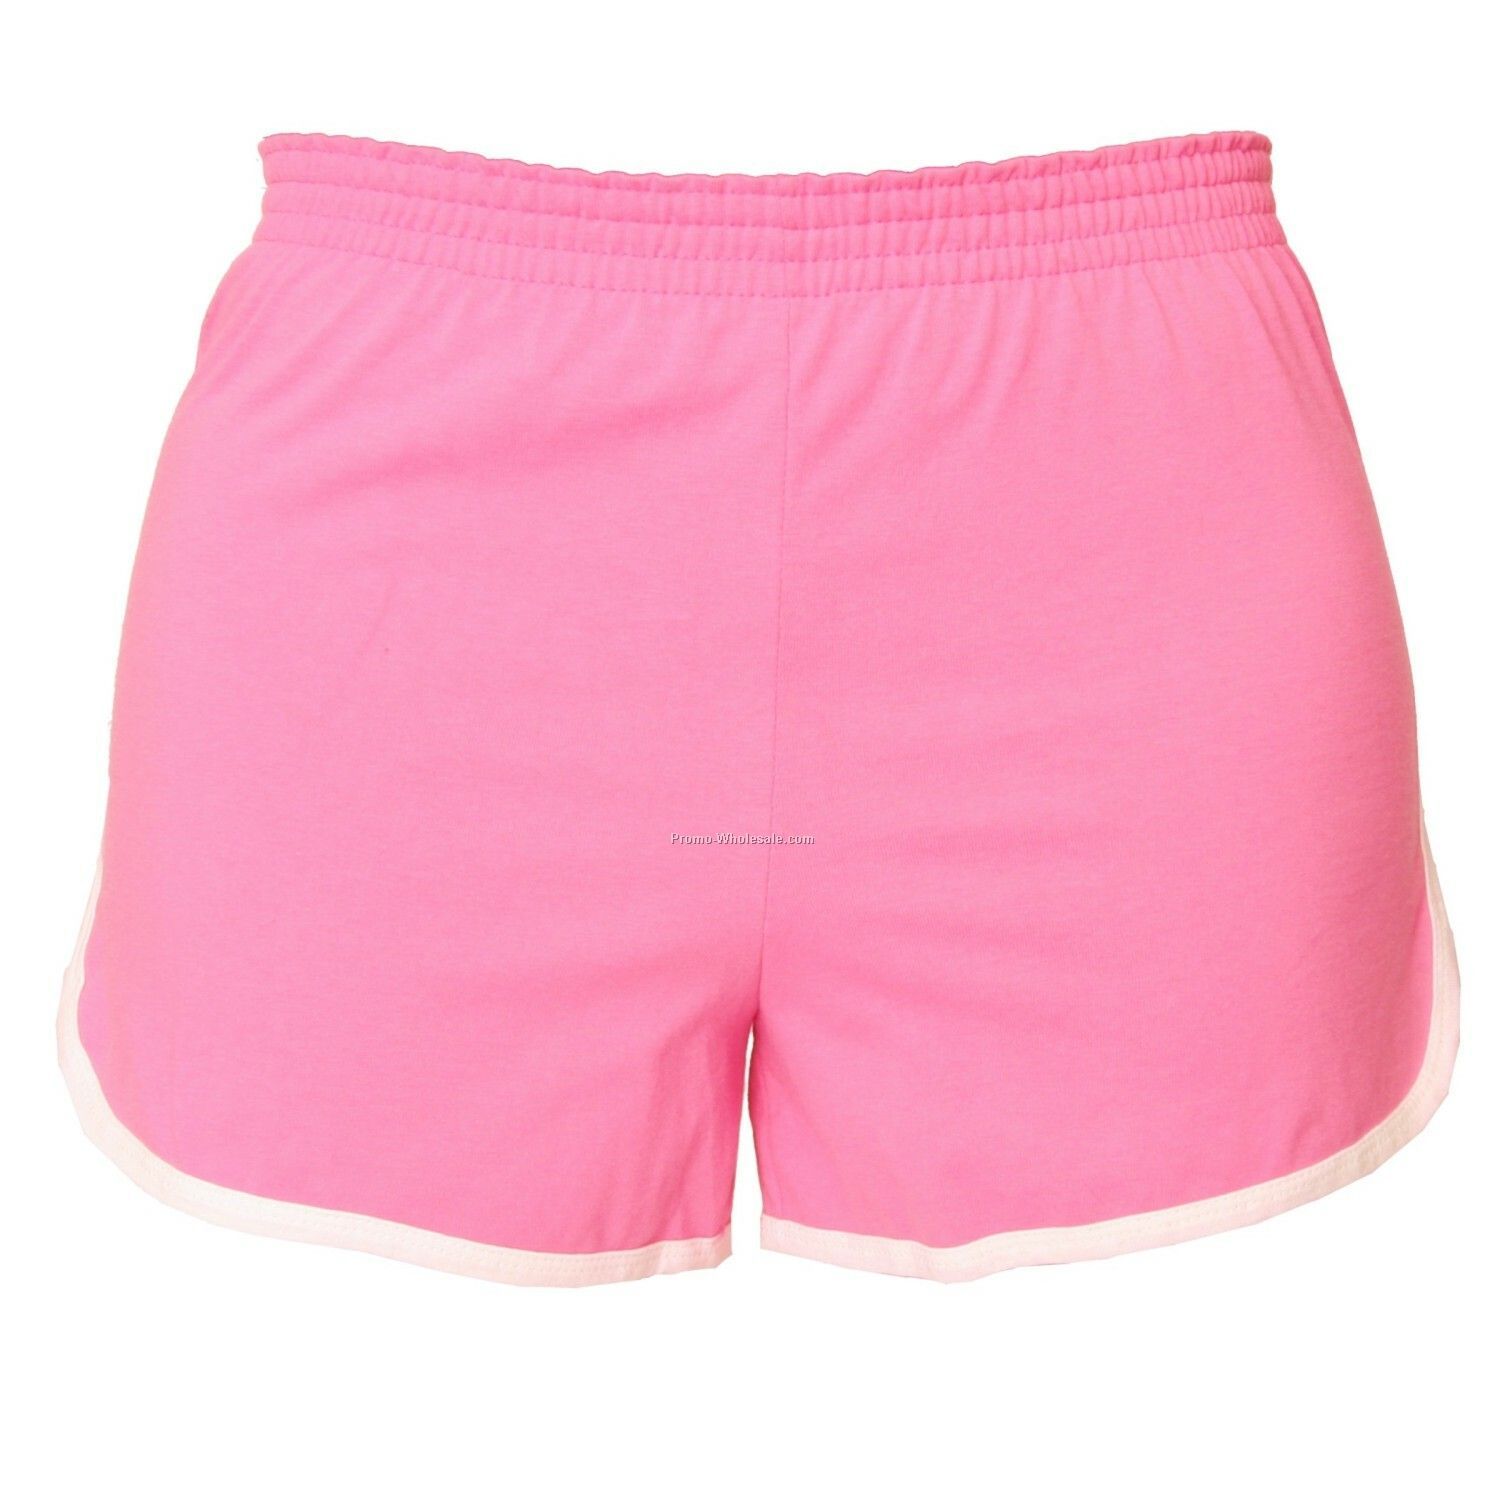 Youths' Pink Retro Shorts (Ys-yl)